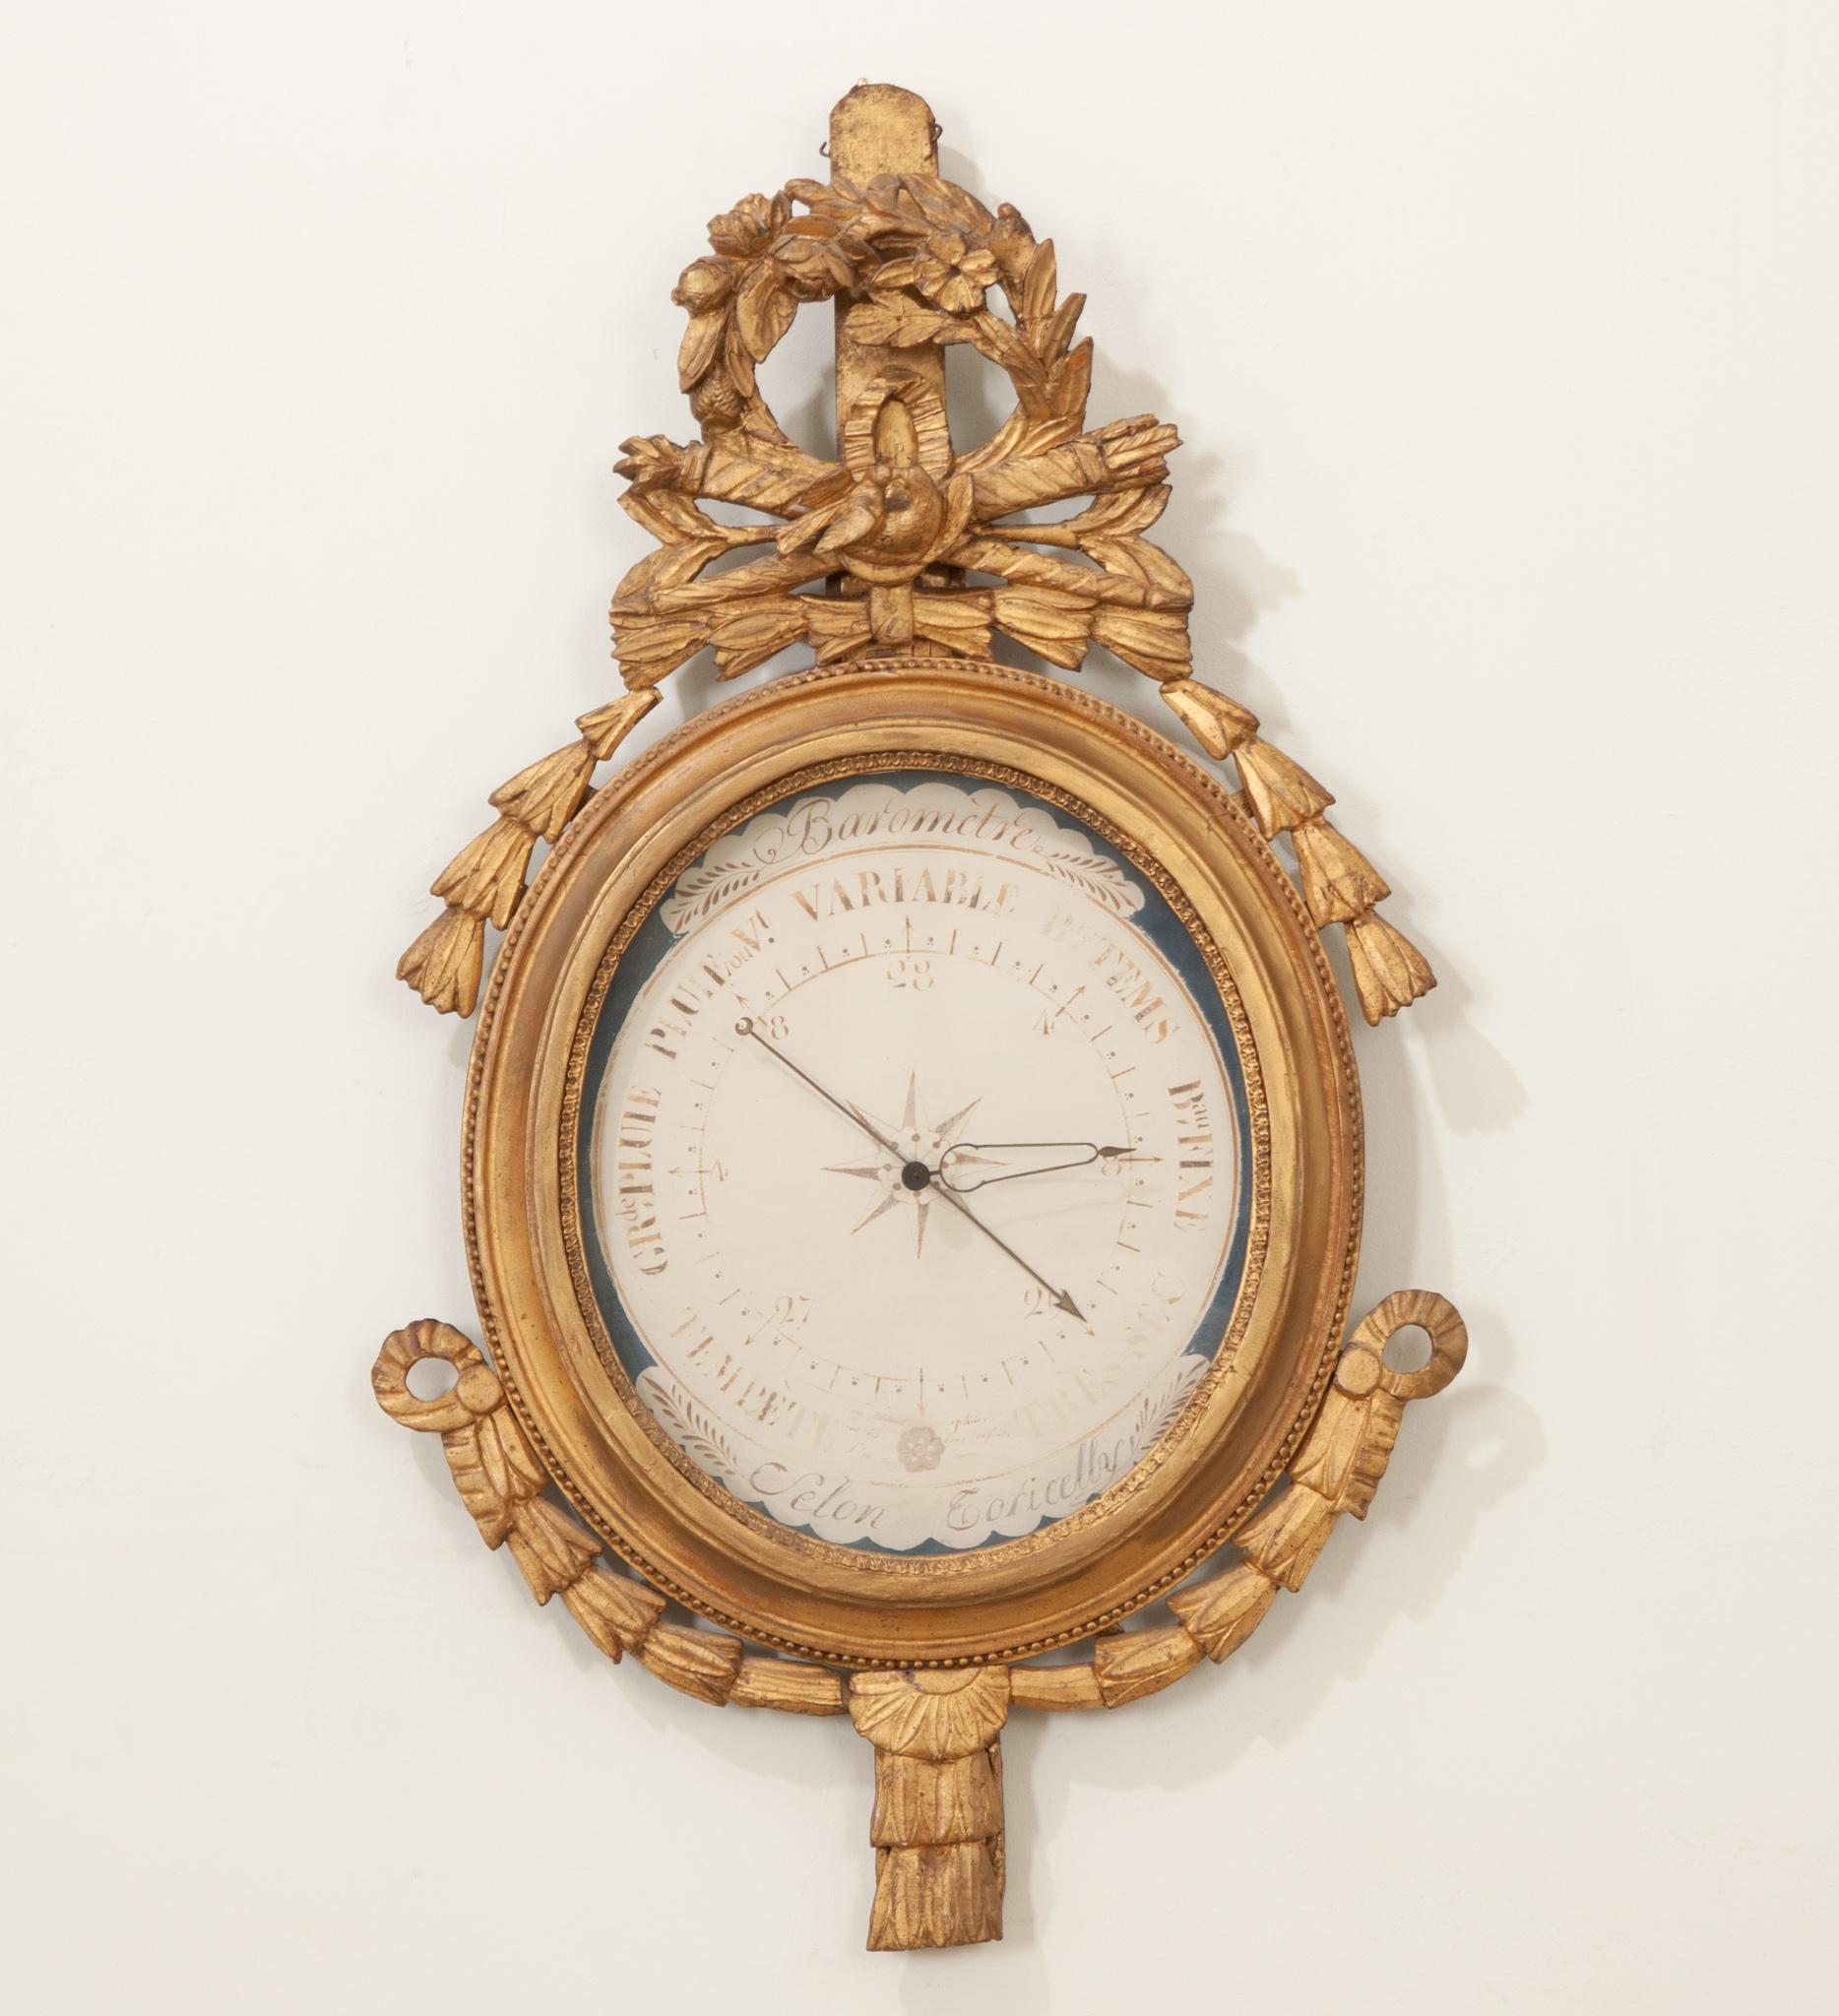 A fabulous French gold-gilt barometer from the beginning of the 19th century. This early instrument of meteorology has been adorned with an extraordinary wreath crest with carved laurel leaves, a plane, saw, and measuring sticks. The face has hand